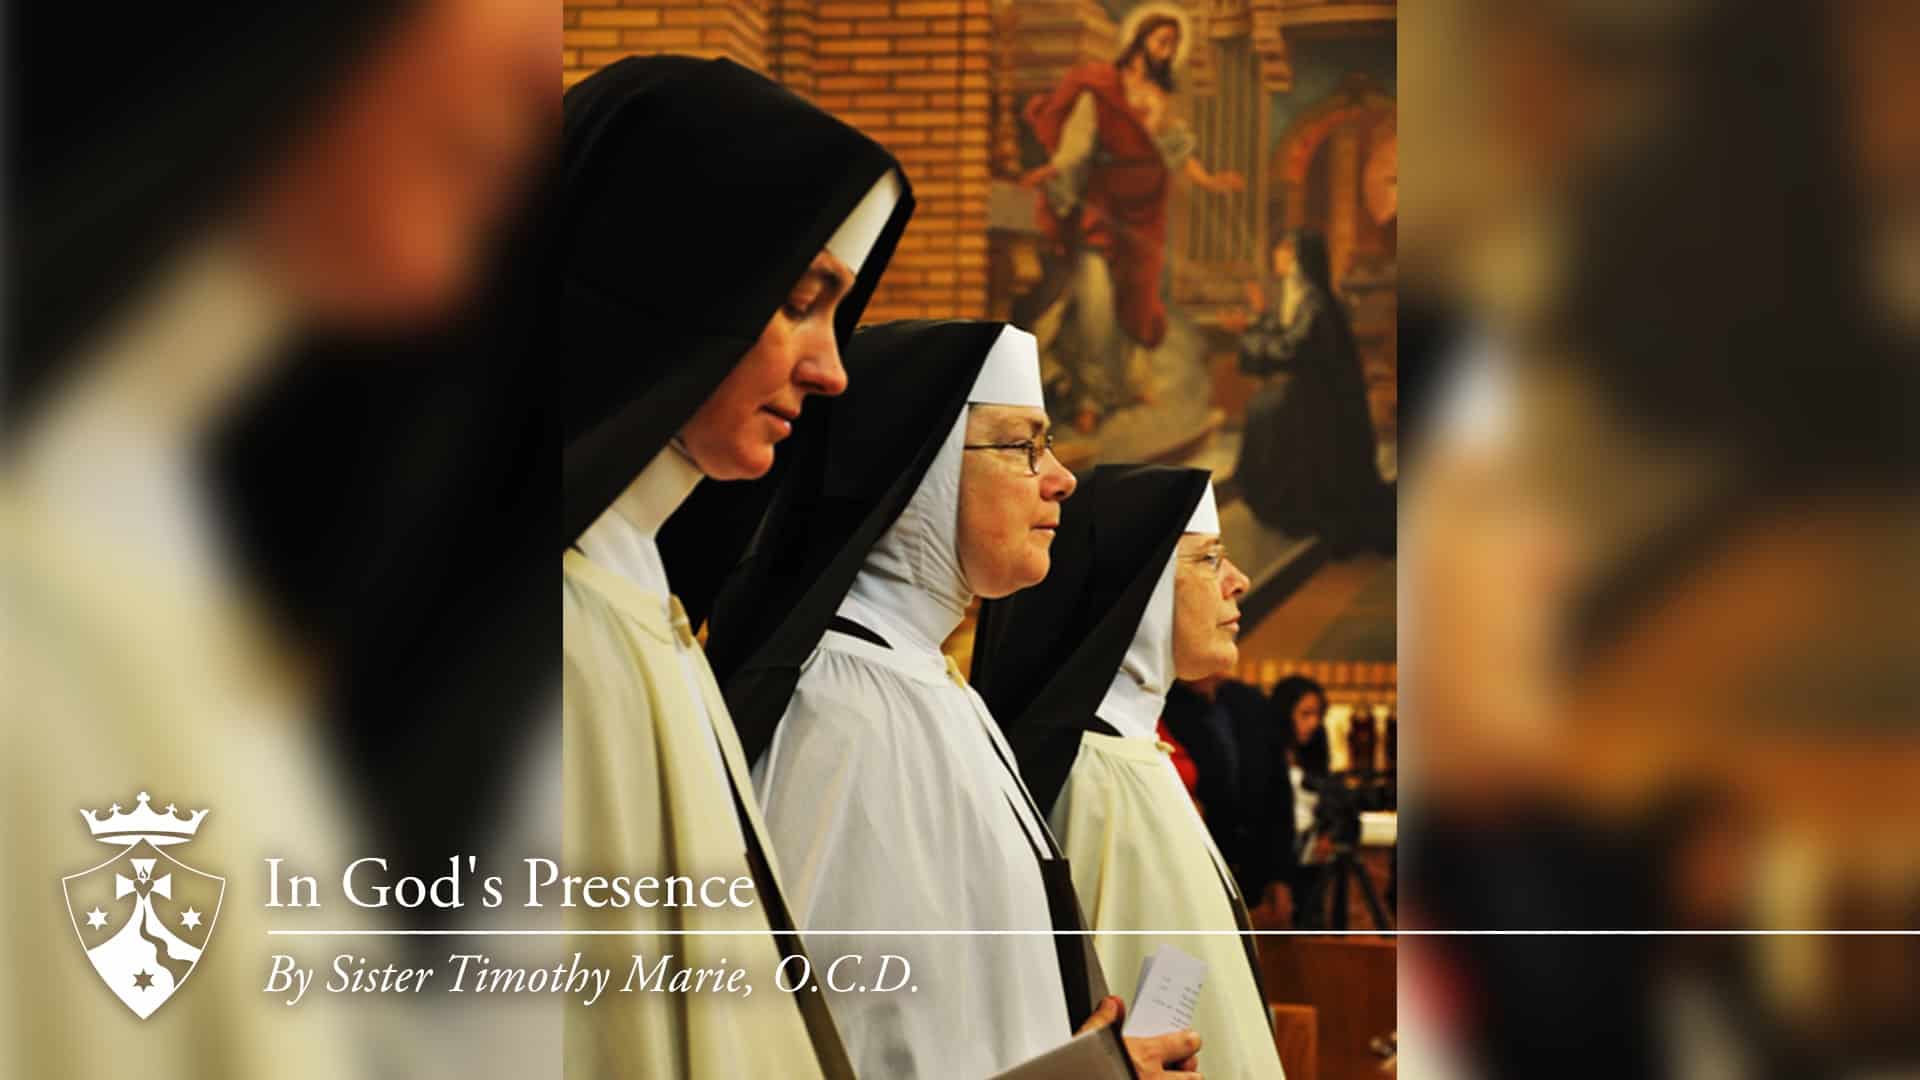 Sisters praying in church, 'In God's Presence, by Sister Timothy Marie, O.C.D.'